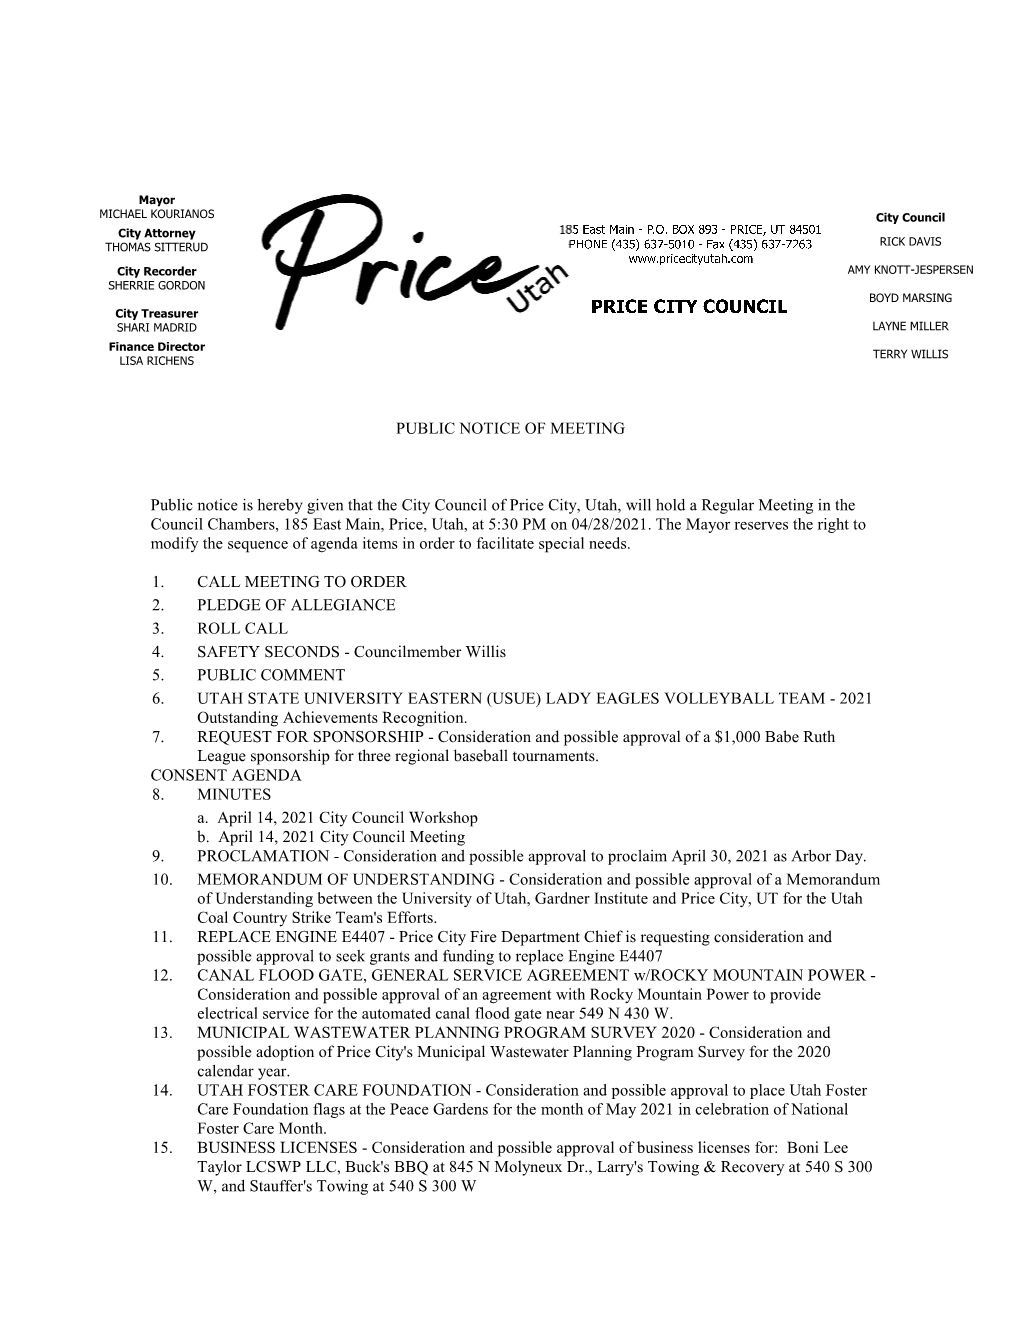 PUBLIC NOTICE of MEETING Public Notice Is Hereby Given That the City Council of Price City, Utah, Will Hold a Regular Meeting In